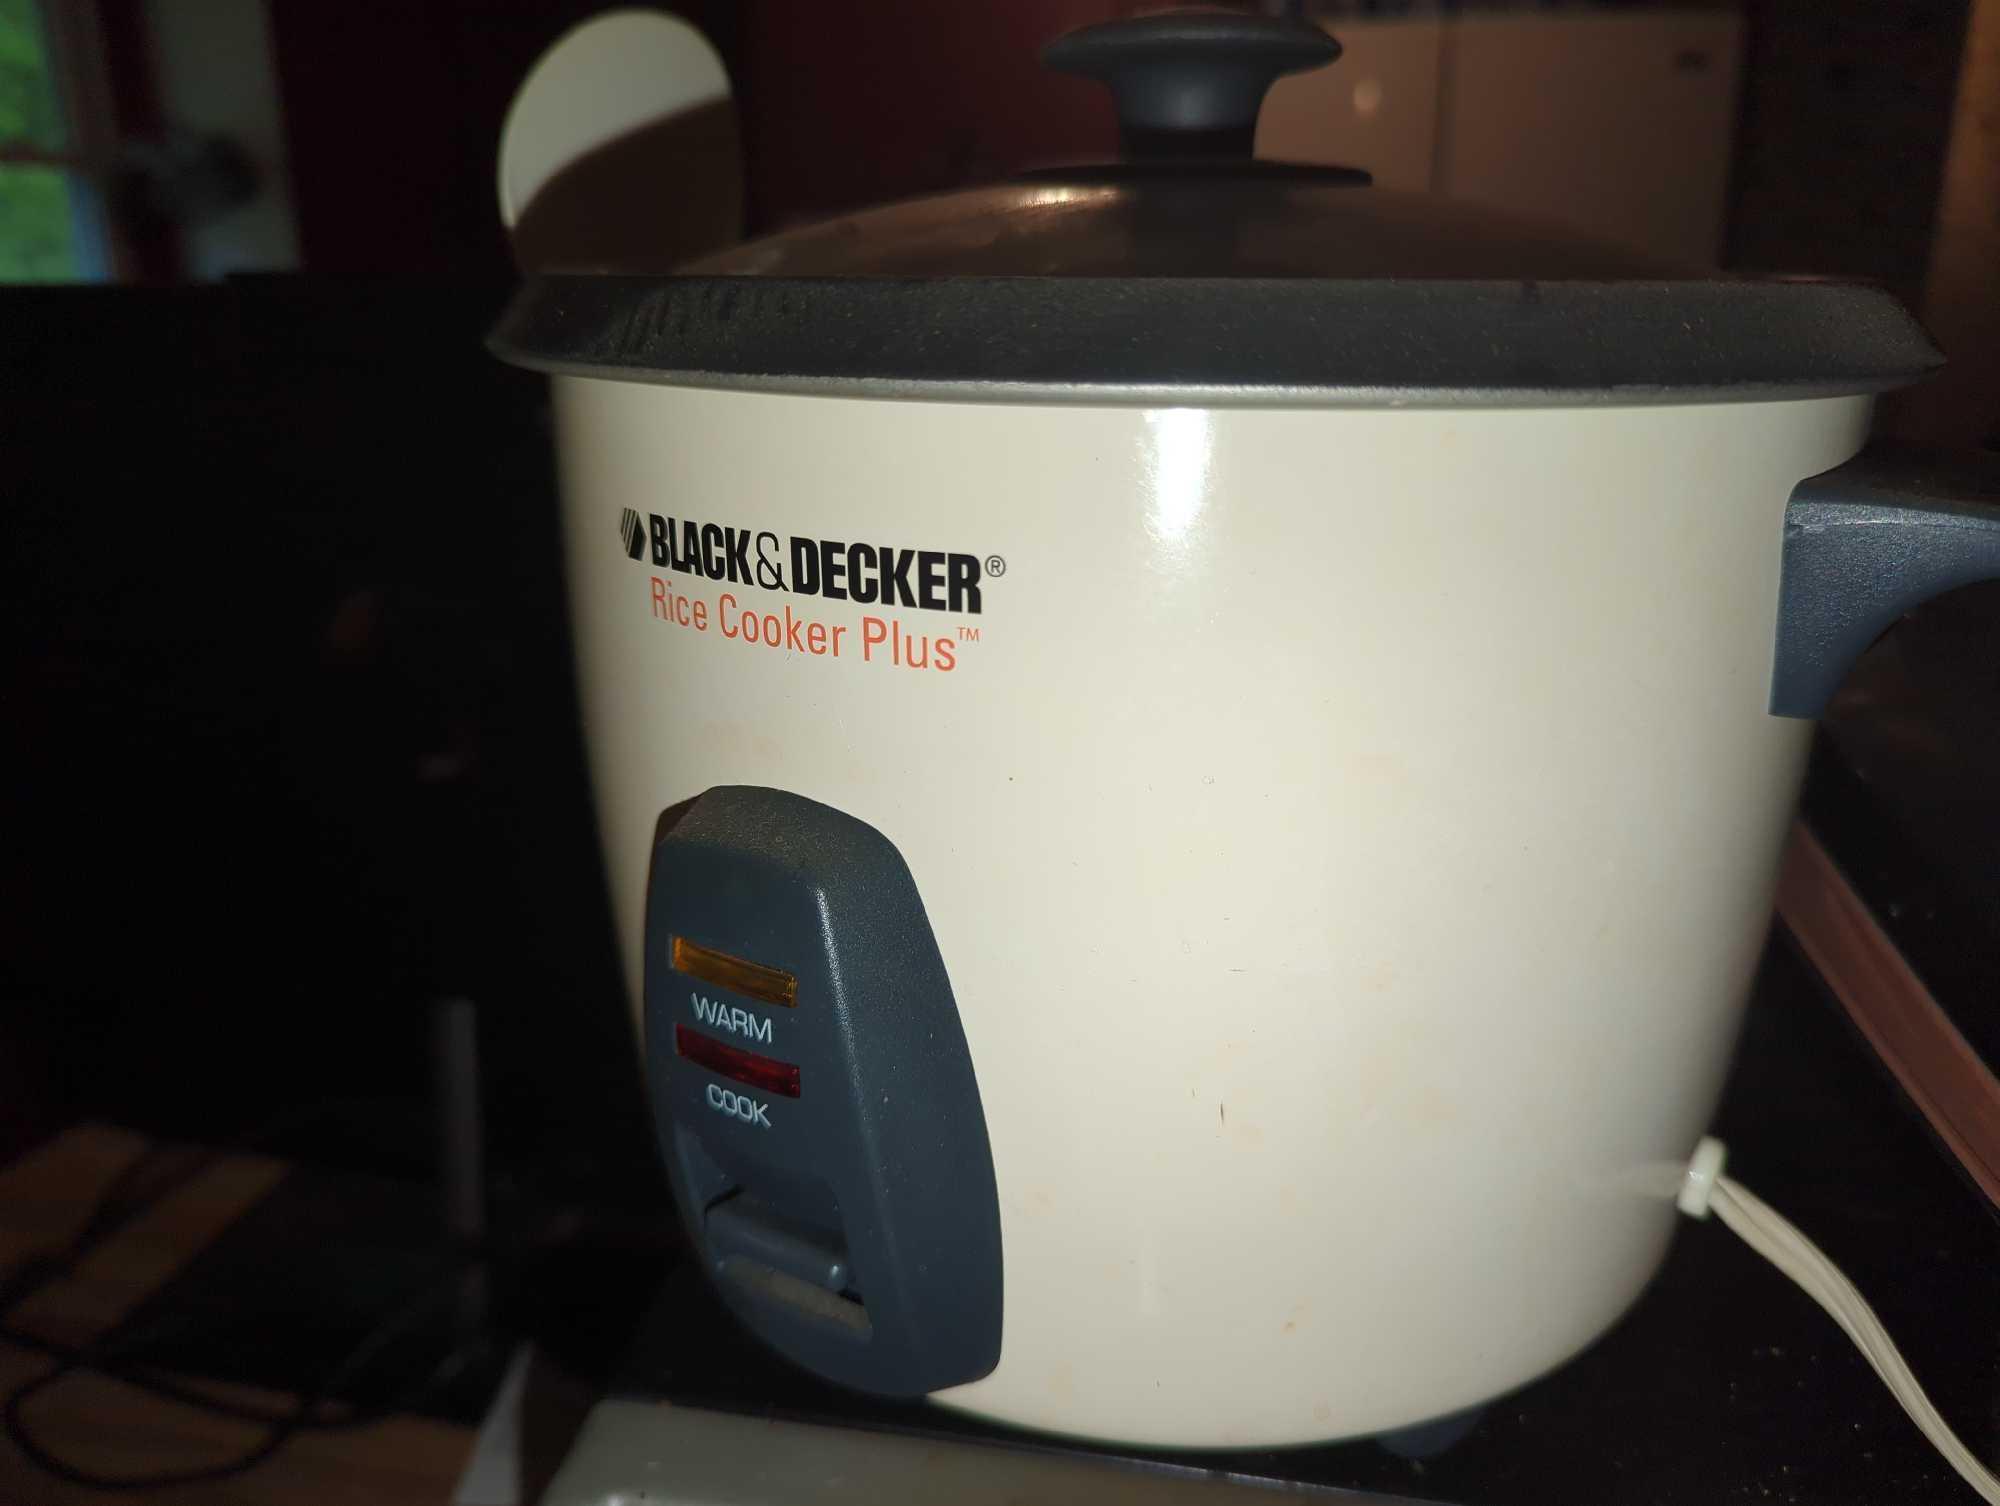 (DR) LOT OF ASSORTED (KIT)CHEN ITEMS INCLUDING GE WAFFLE MAKER, BLACK AND DECKER RICE COOKER PLUS,